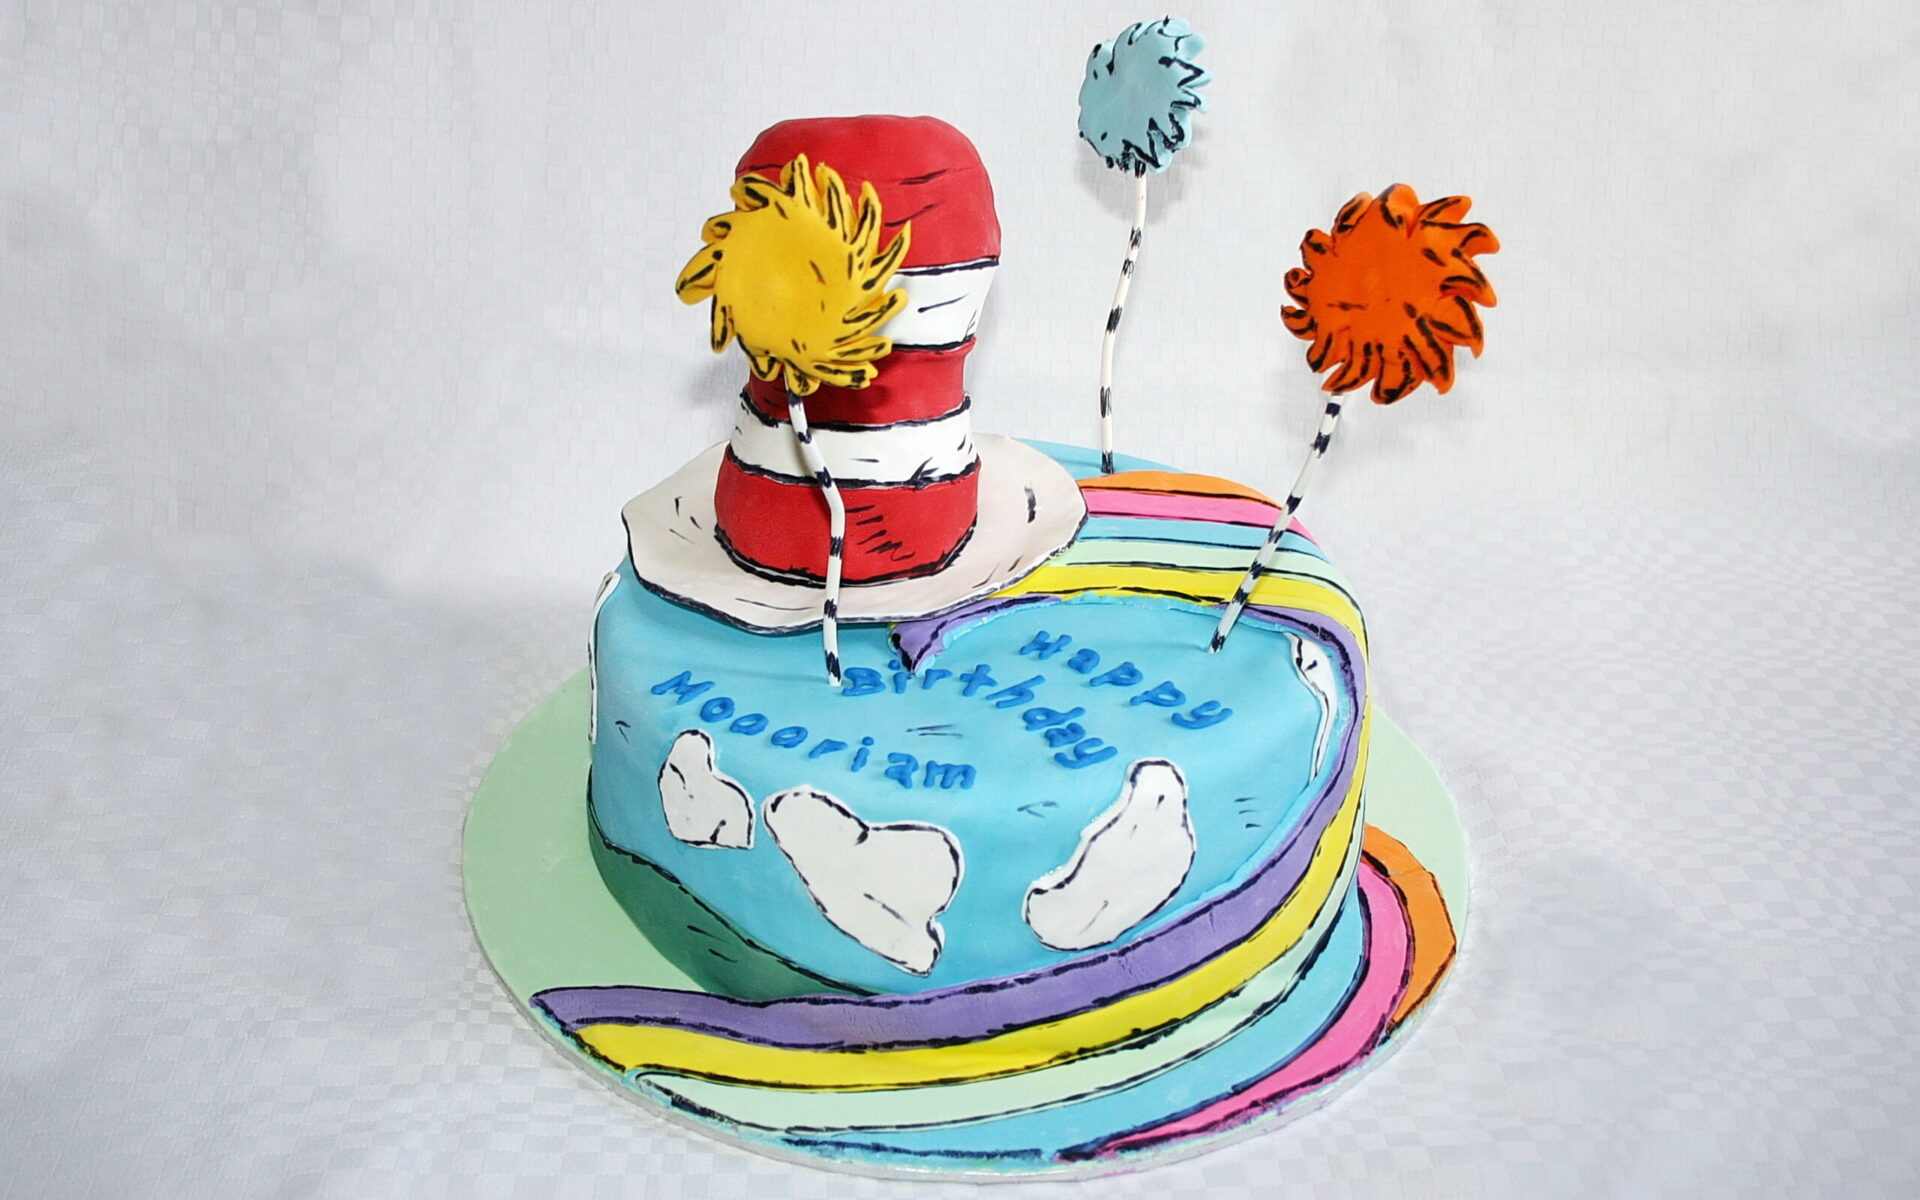 Doctor Theme Cake Online Delivery in Delhi NCR | Flavours Guru